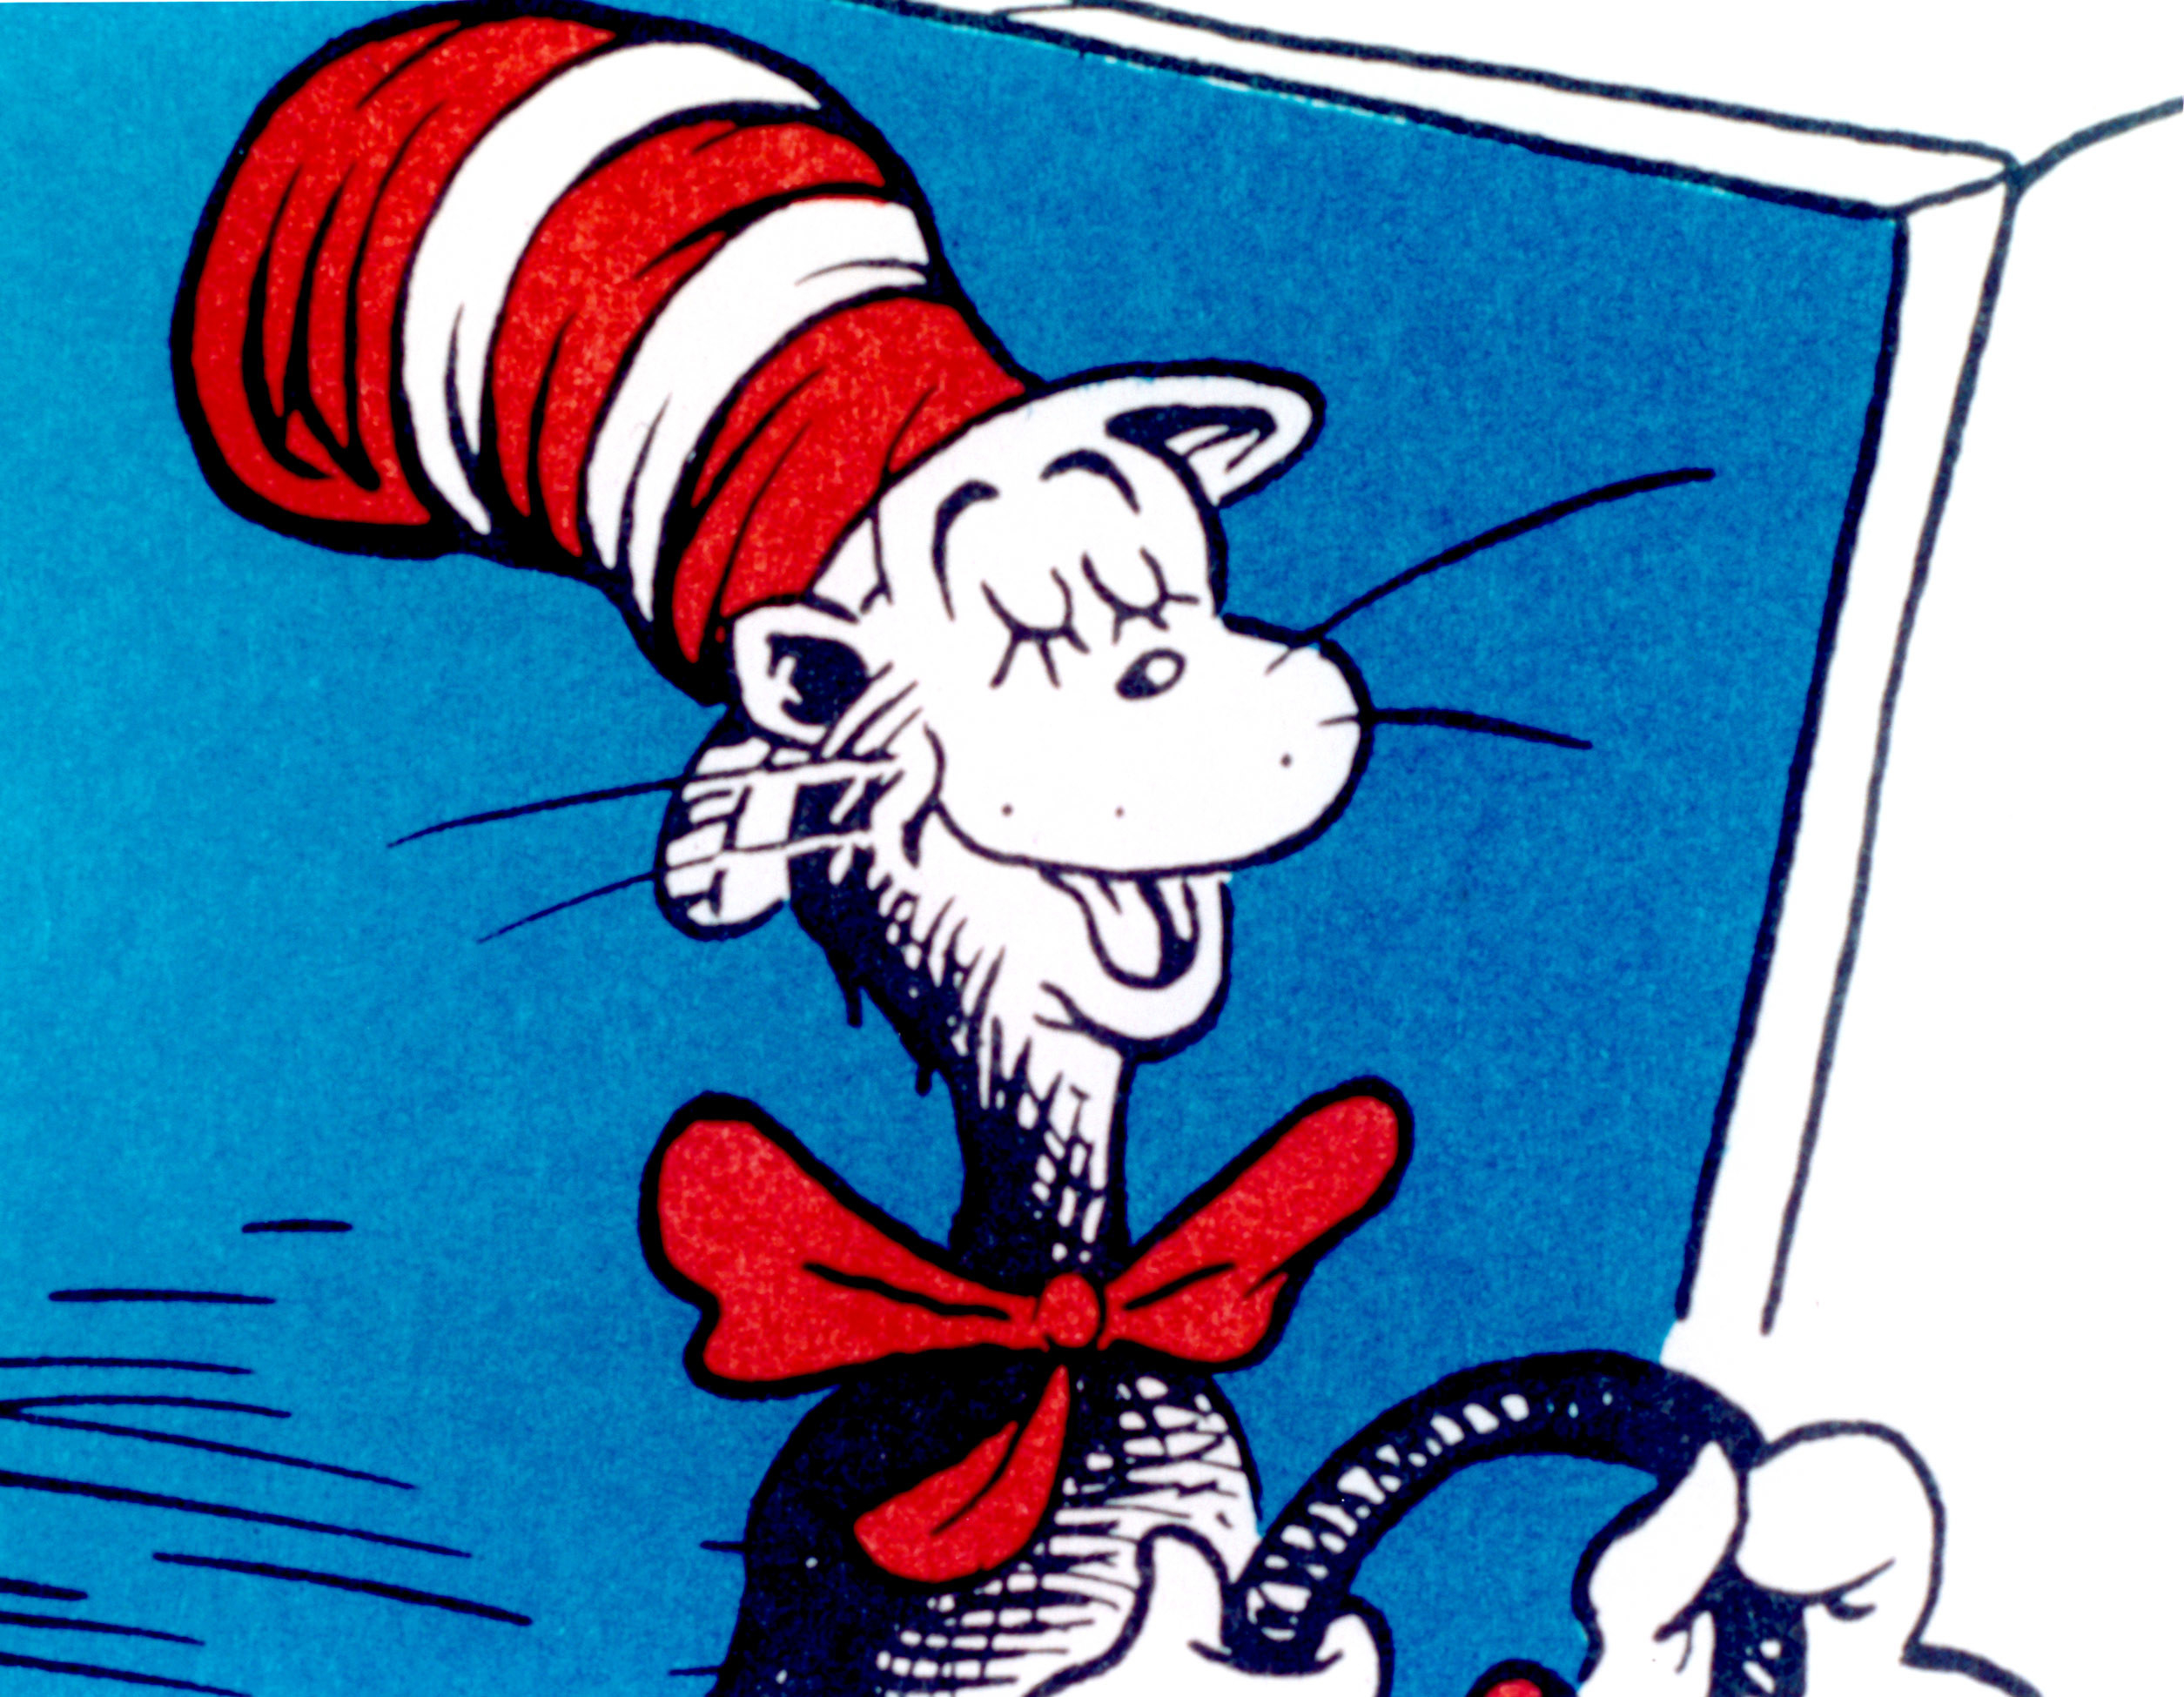 The Cat in the Hat in 1971